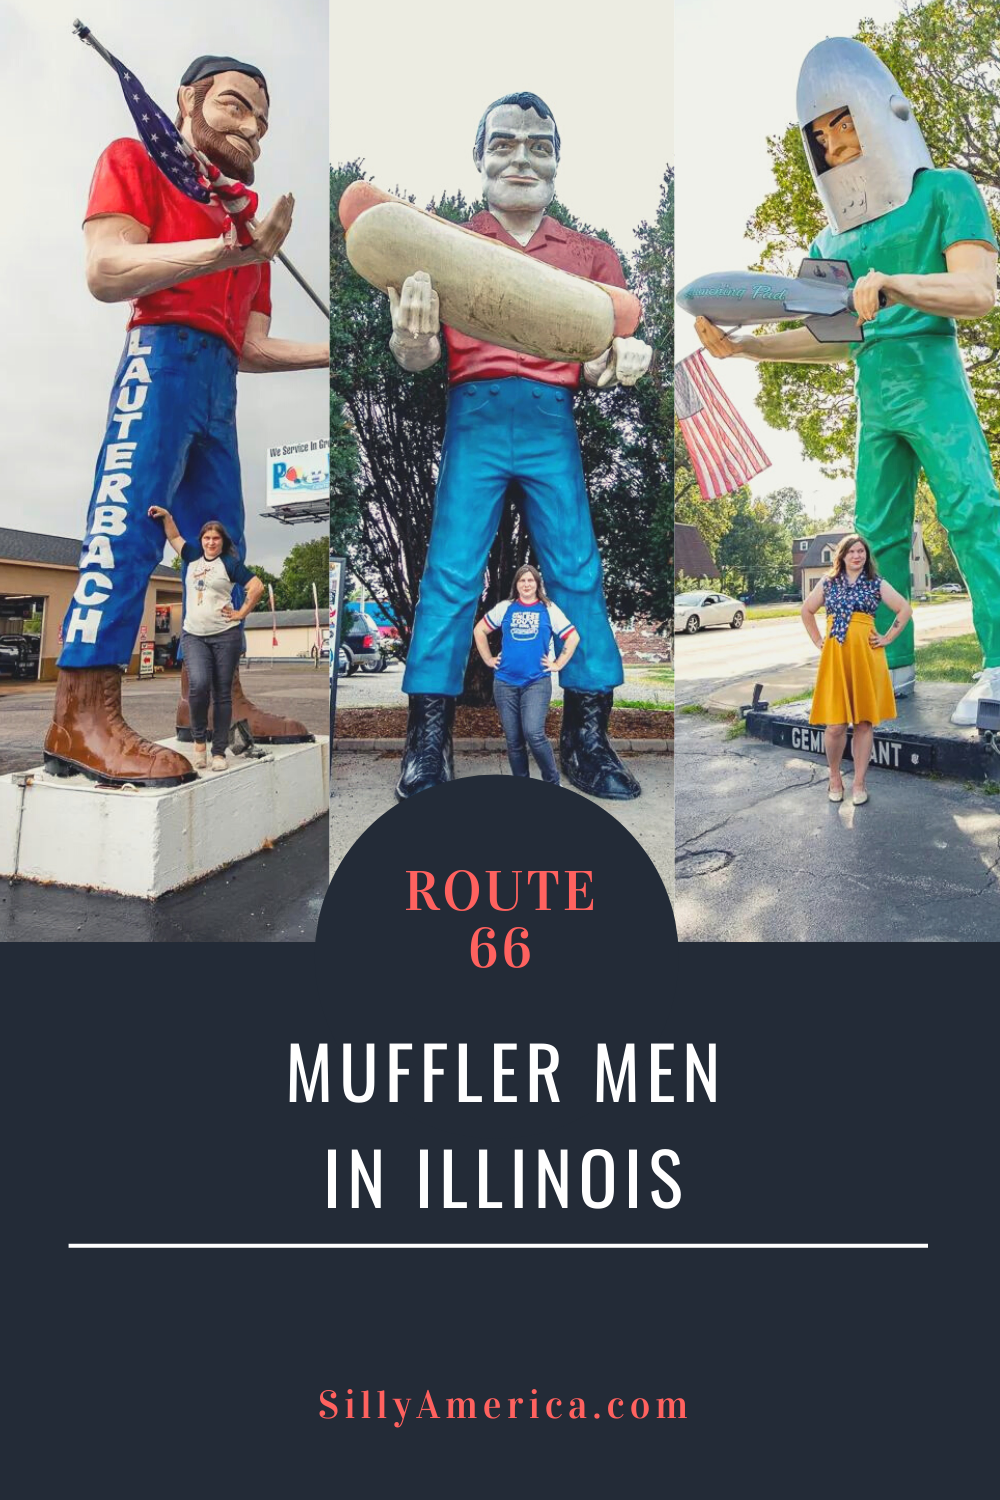 If you're traveling on Route 66 you'll find roadside attractions of every sort. There's one roadside attraction that particularly stands out: the muffler man. Known for their "three gentle giants of Illinois" you can find three famous Route 66 Muffler Men in Illinois and a few more of their friends too.  #RoadTrips #RoadTripStop #Route66 #Route66RoadTrip #IllinoisRoute66 #Illinois #IllinoisRoadTrip #IllinoisRoadsideAttractions #RoadsideAttractions #RoadsideAttraction #RoadsideAmerica #RoadTrip